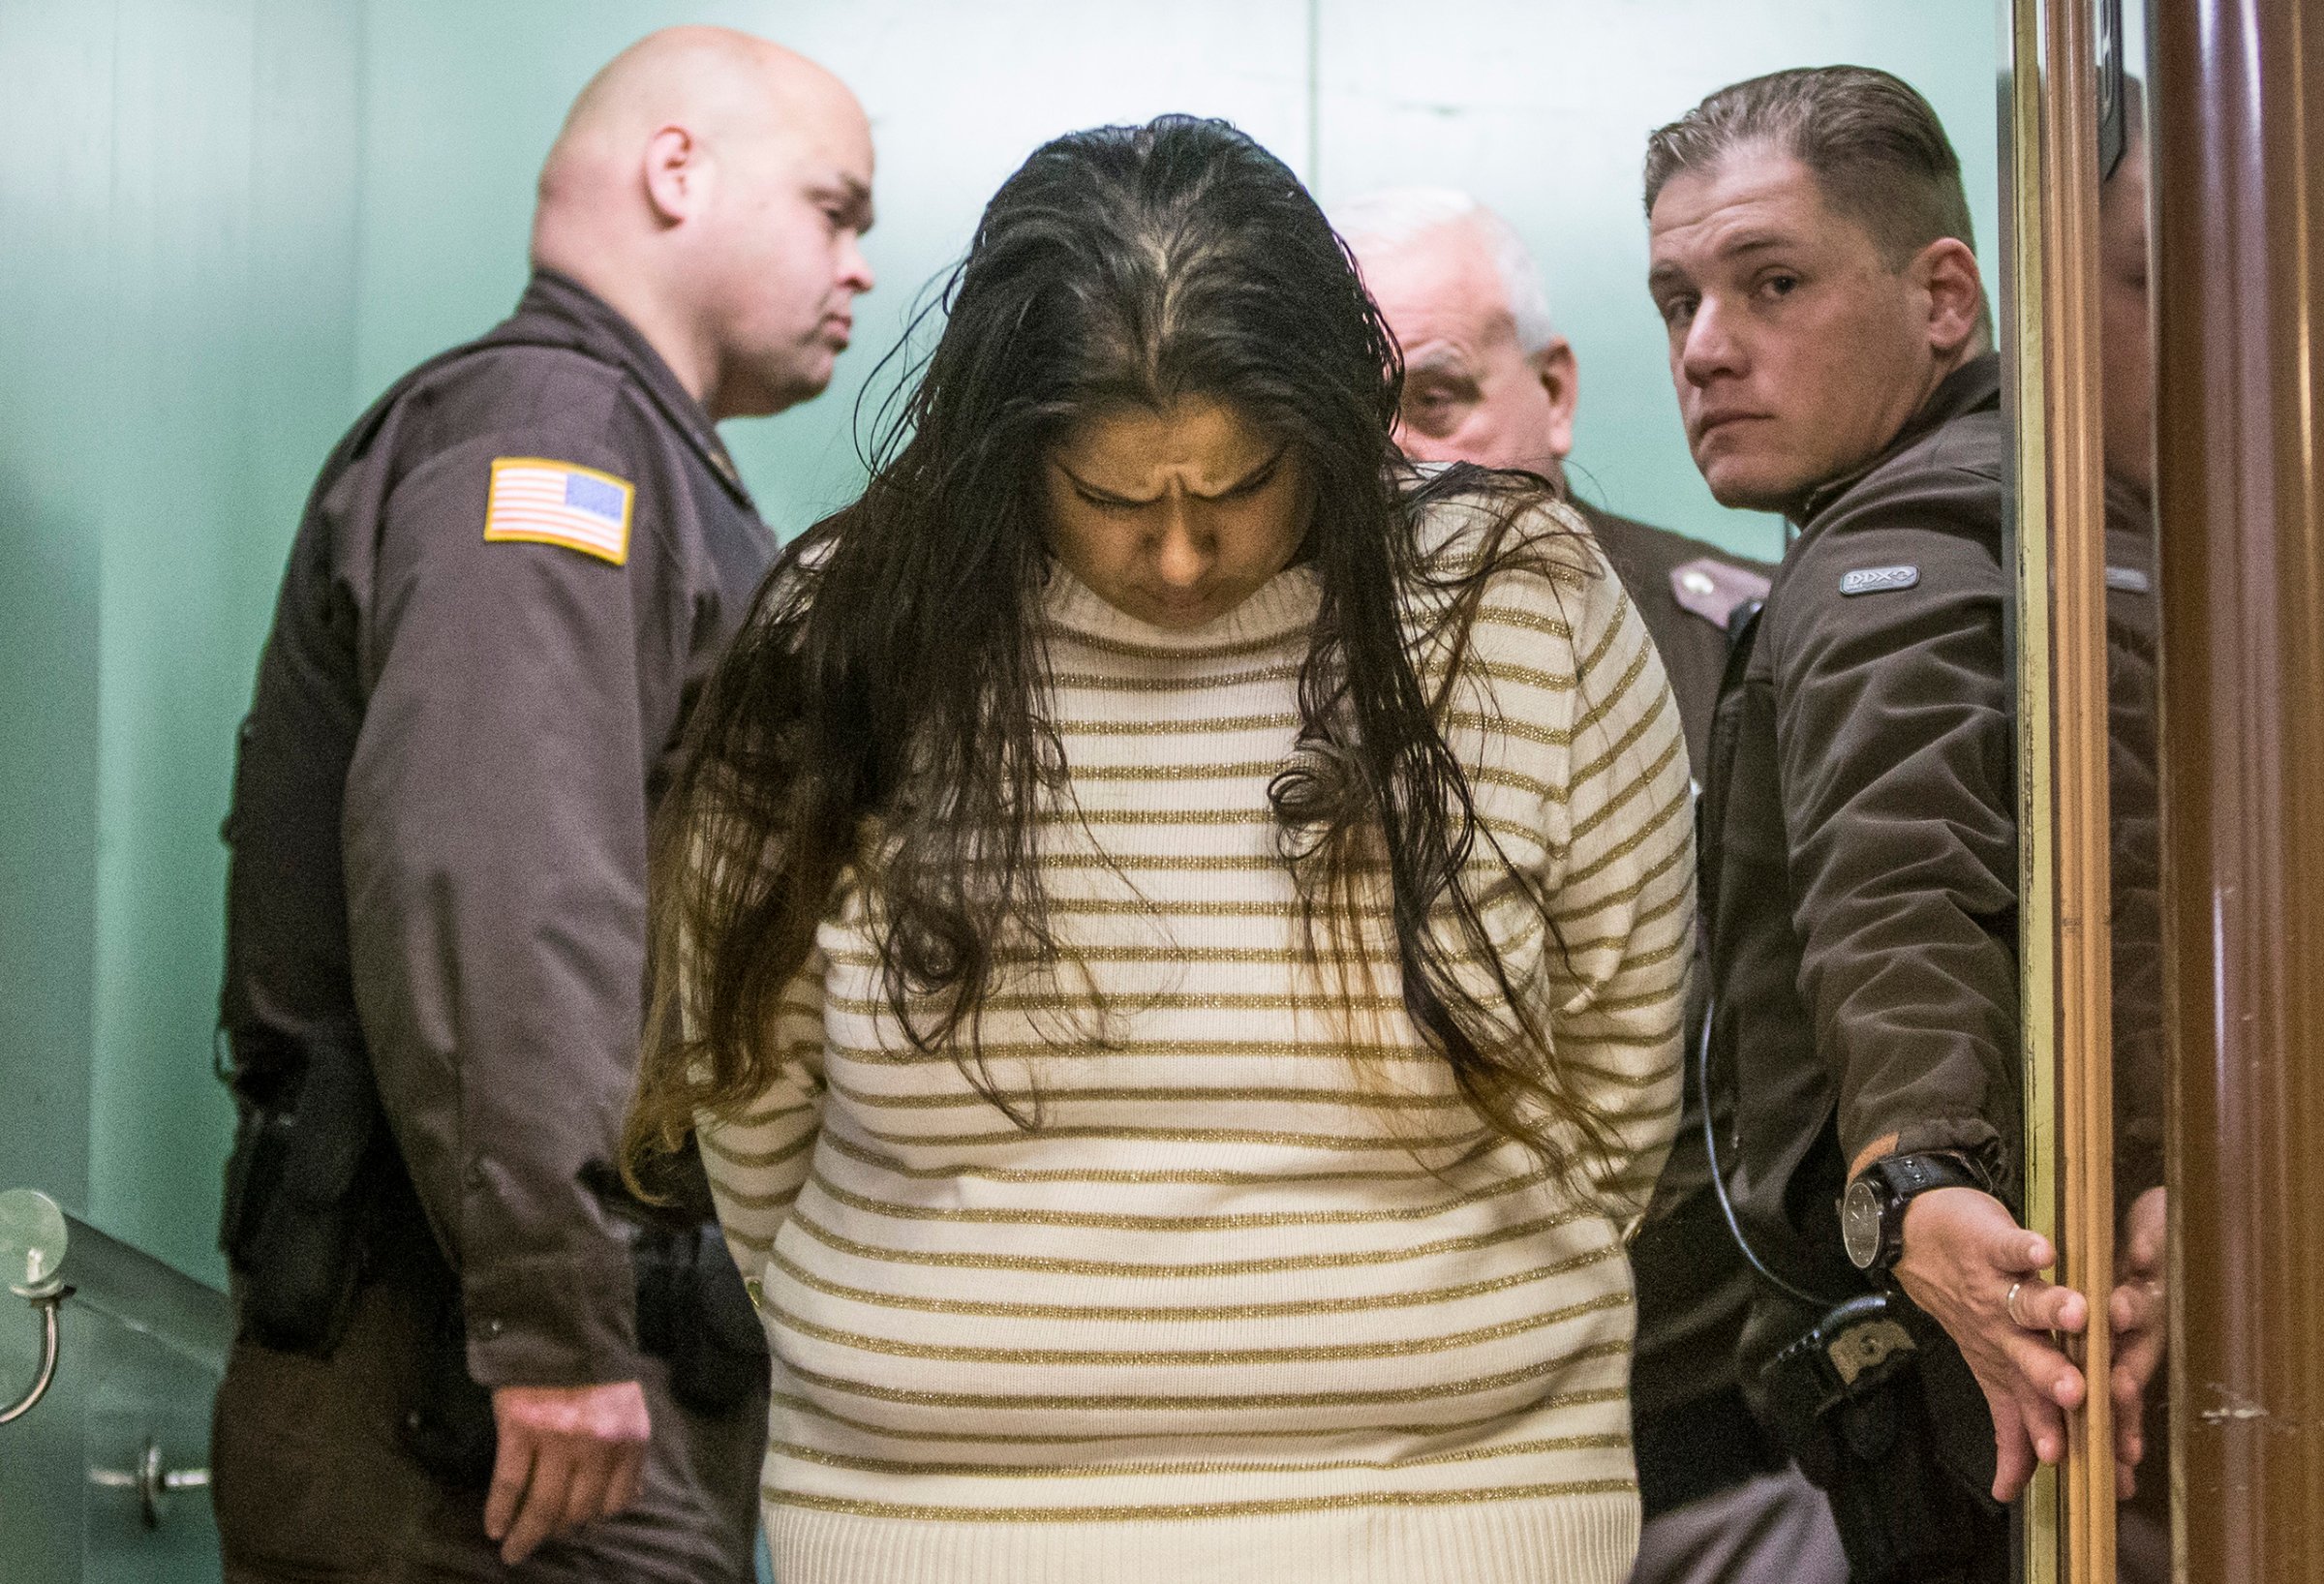 Purvi Patel is taken into custody after being sentenced to 20 years in prison for feticide and neglect of a dependent, at the St. Joseph County Courthouse in South Bend, Indiana, March 30, 2015.